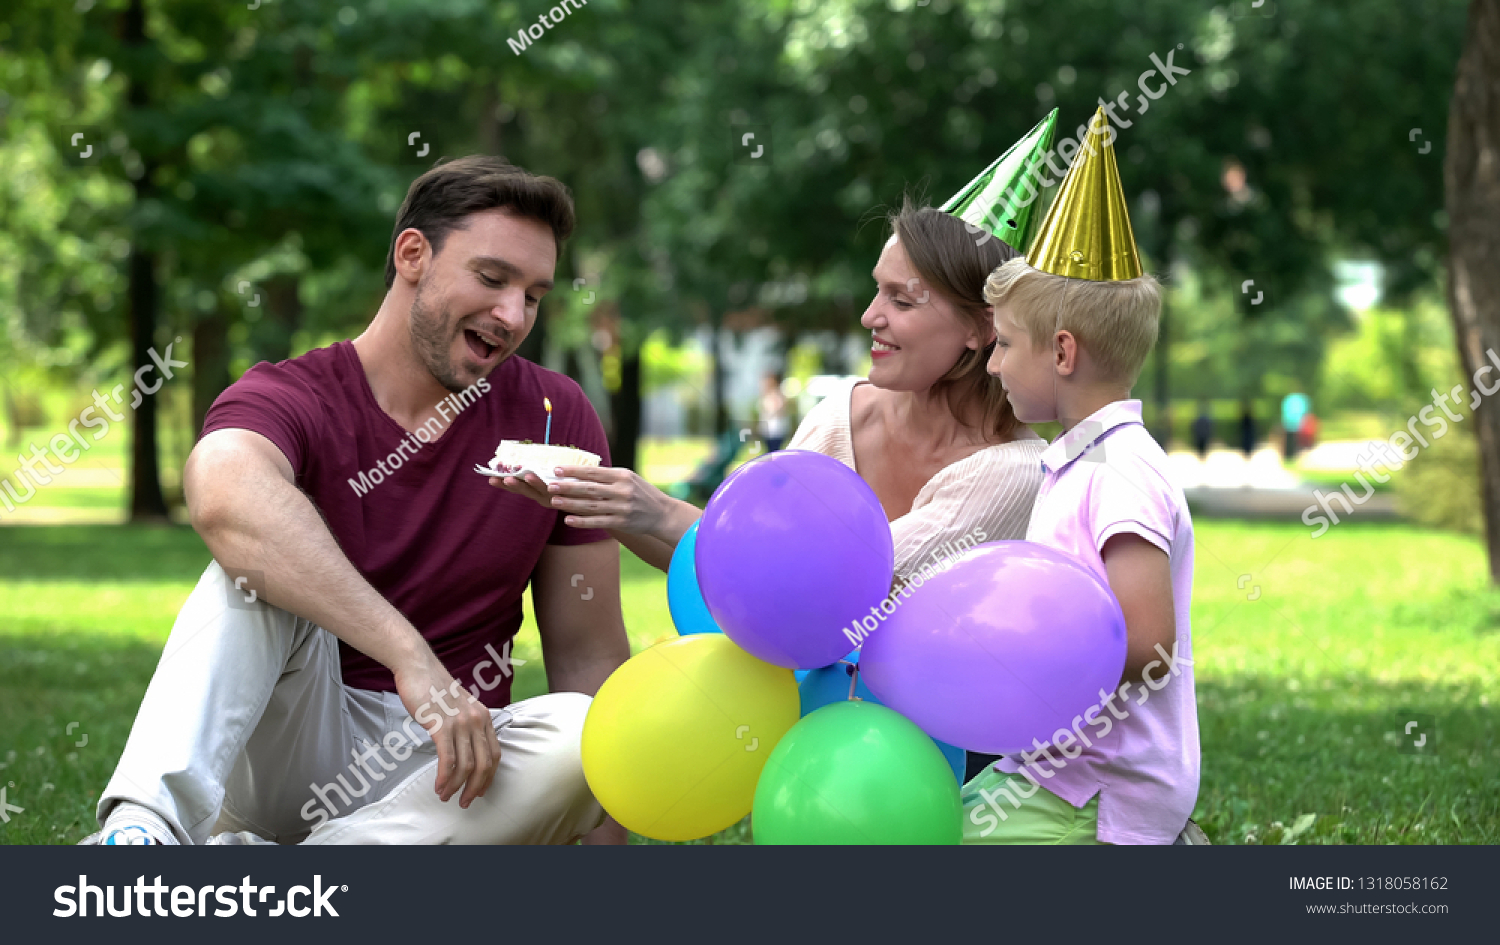 Mother and son congratulate dad on birthday, pleasant surprise from close people #1318058162